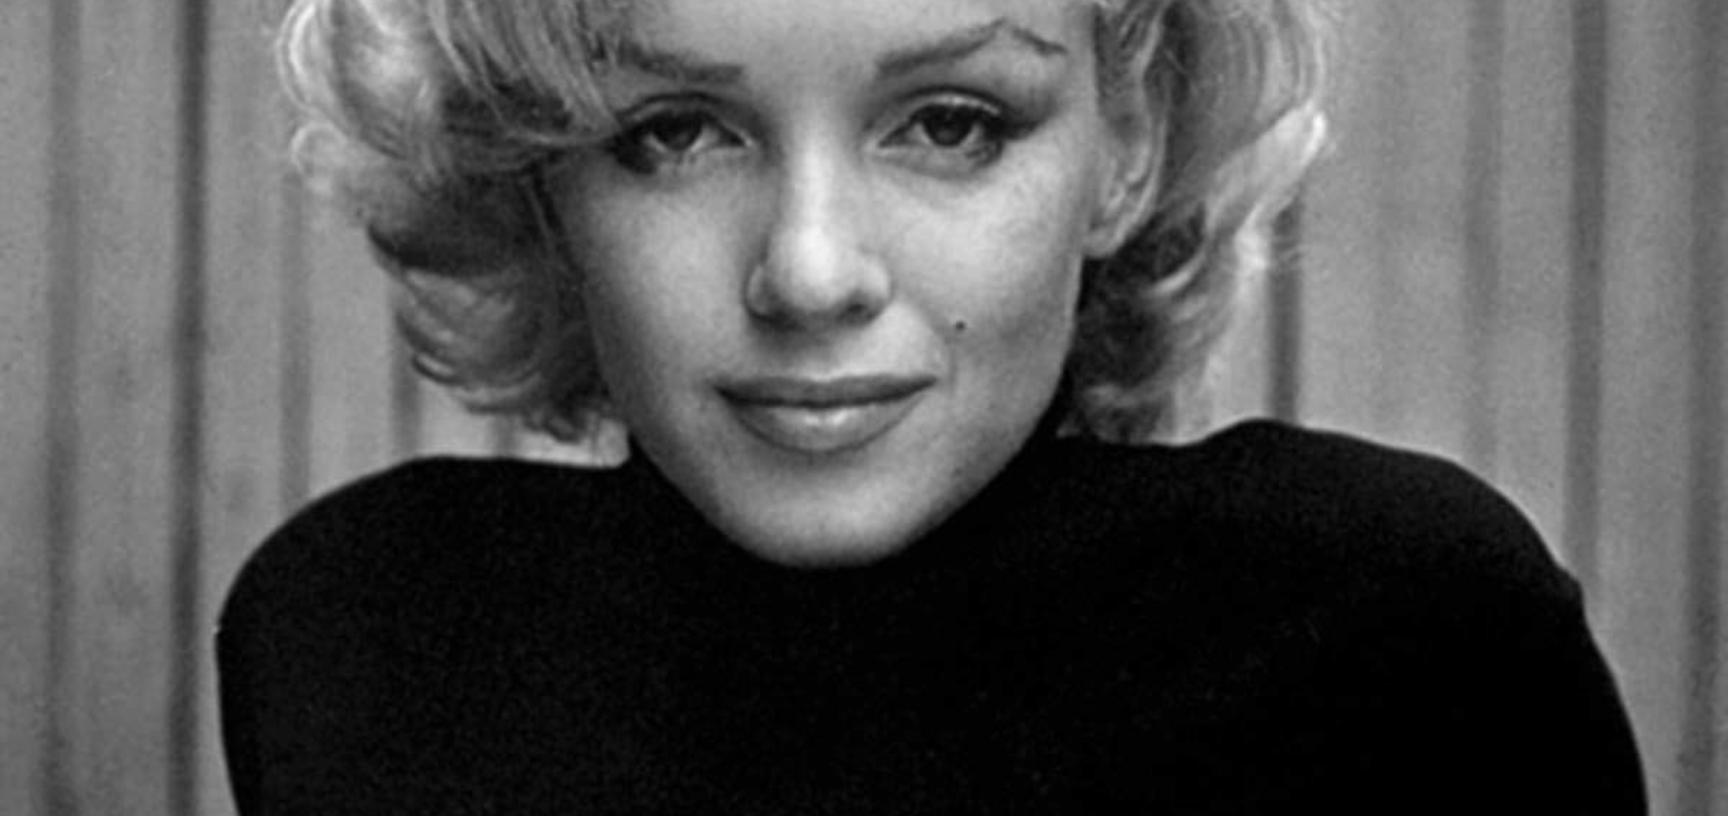 bw marilyn monroe photo alfred eisenstaedt pix inc the life picture collection getty images 53376357 cropped